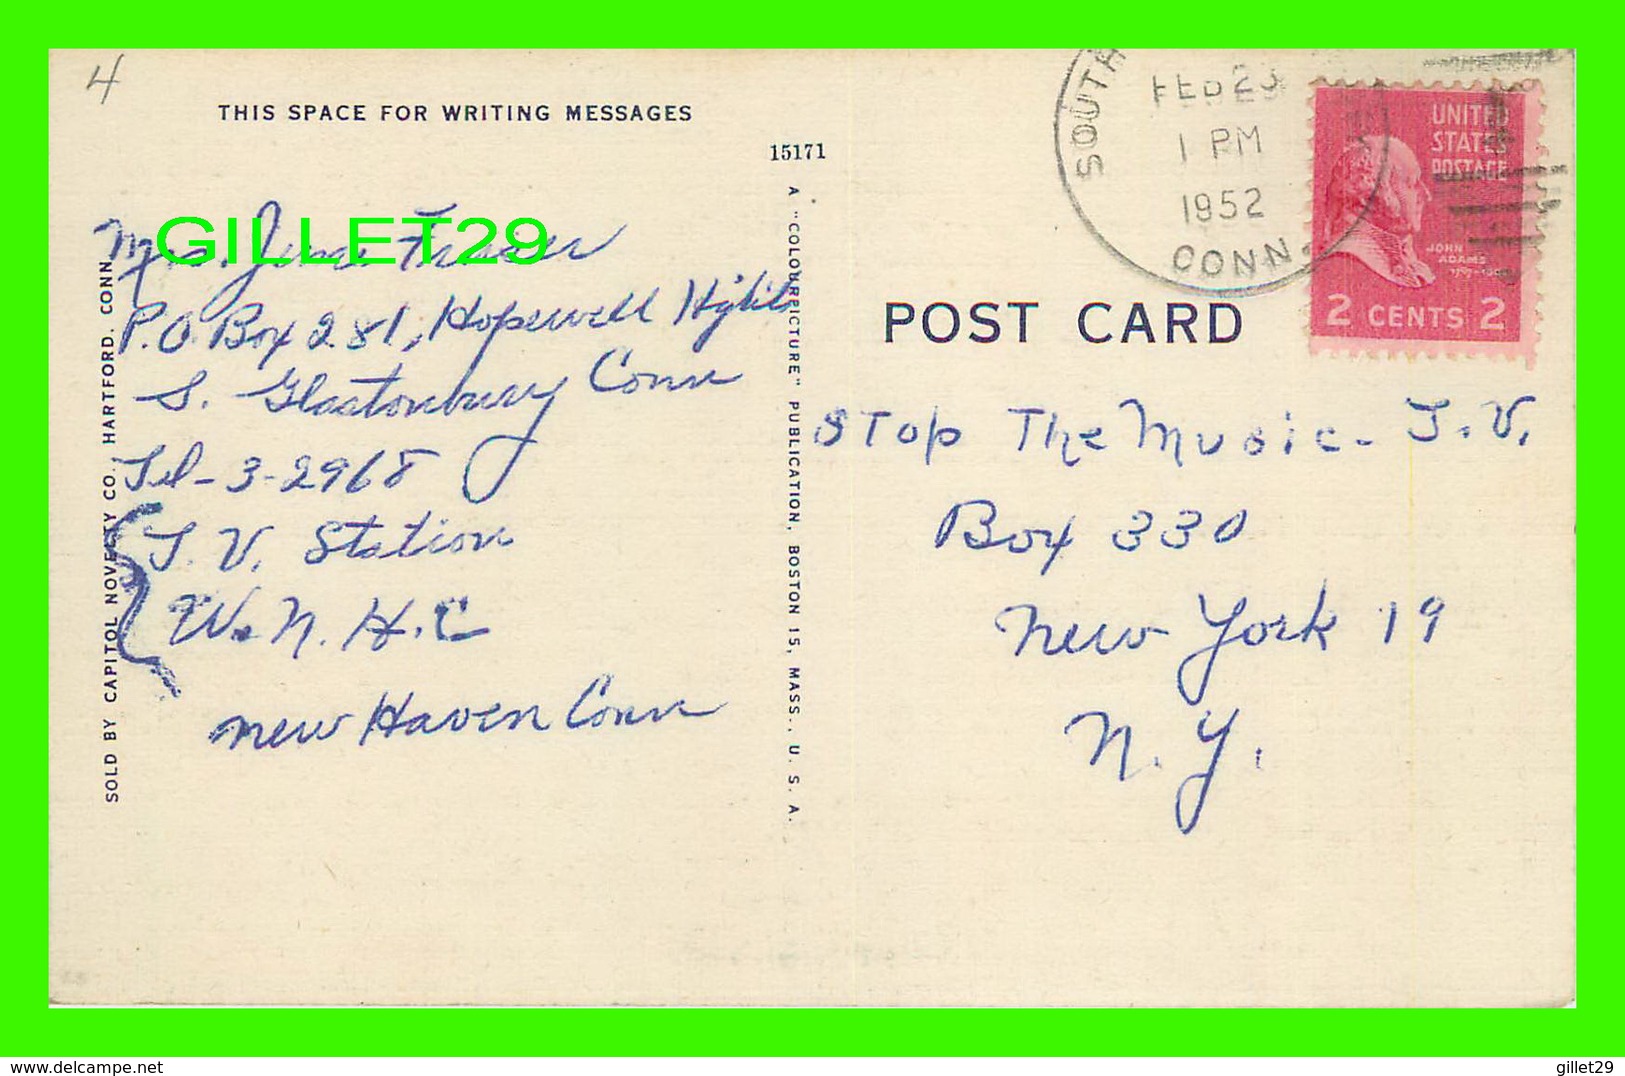 HARTFORD, CT - STATE ARMORY - CAPITOL NOVELTY CO - TRAVEL IN 1952 - - Hartford